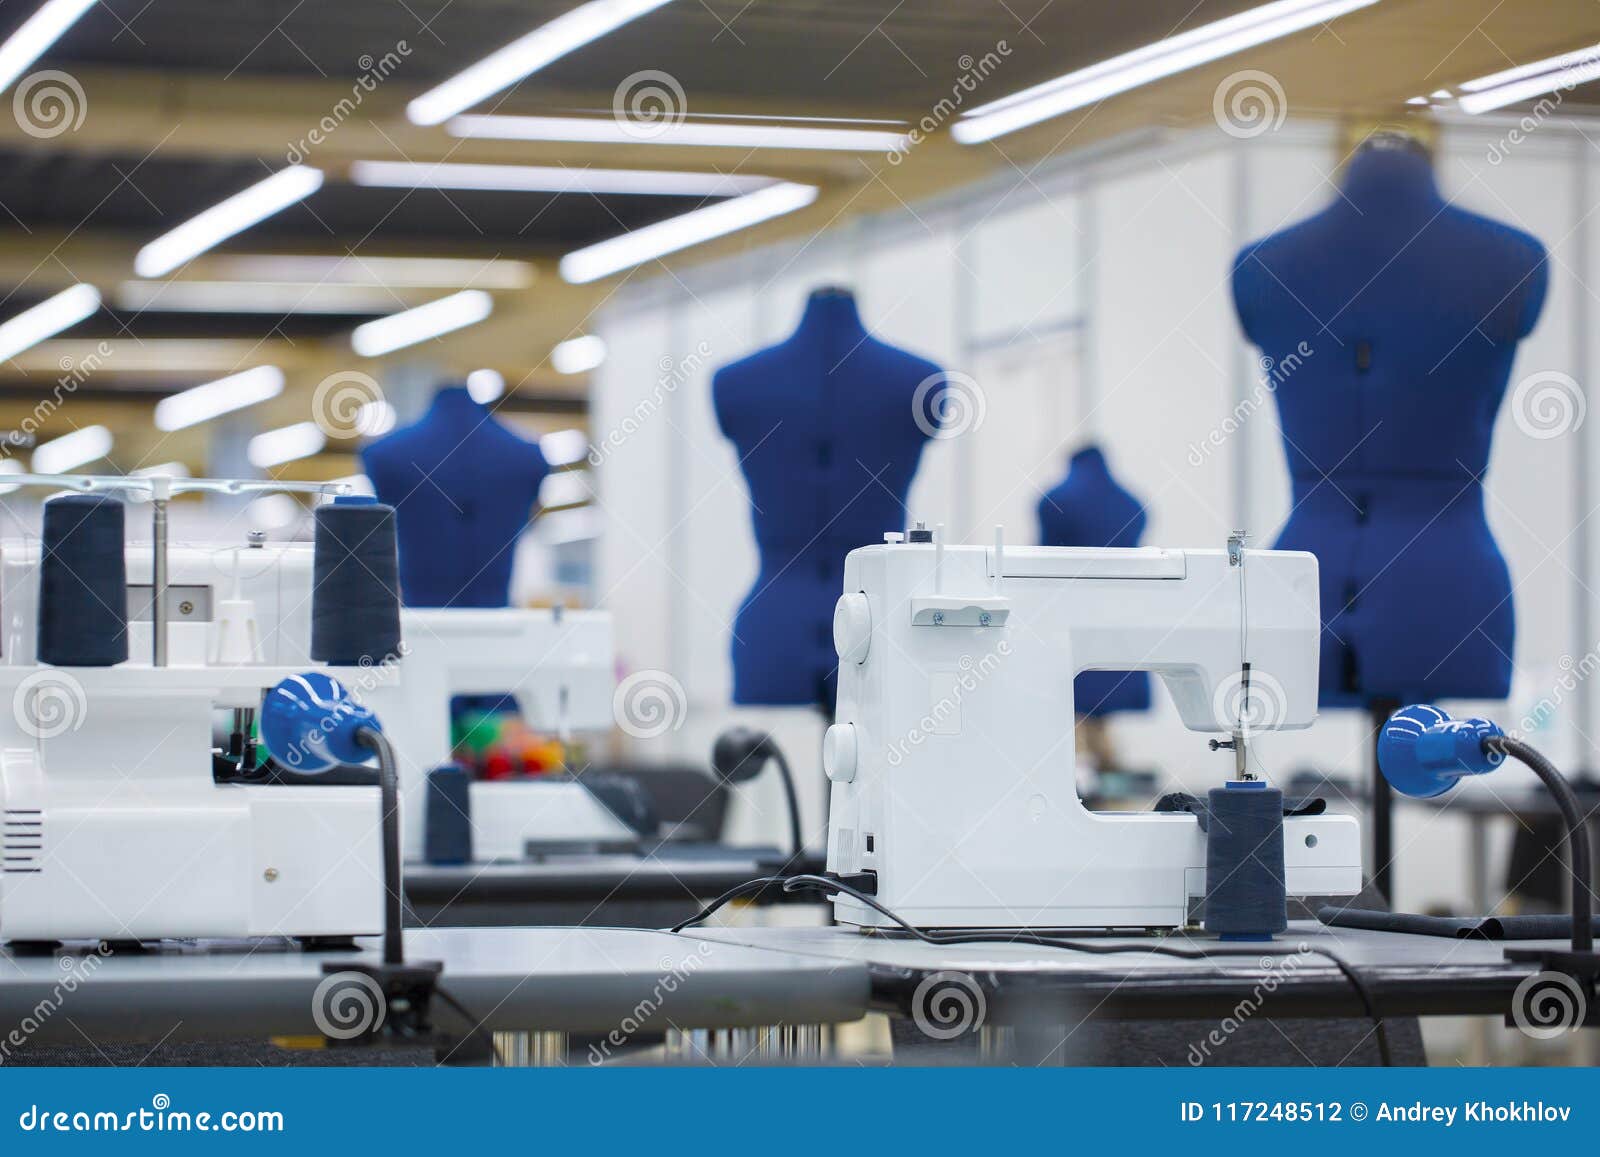 Interior Of A Store Selling Womens Clothes And Accessories Stock Photo -  Download Image Now - iStock